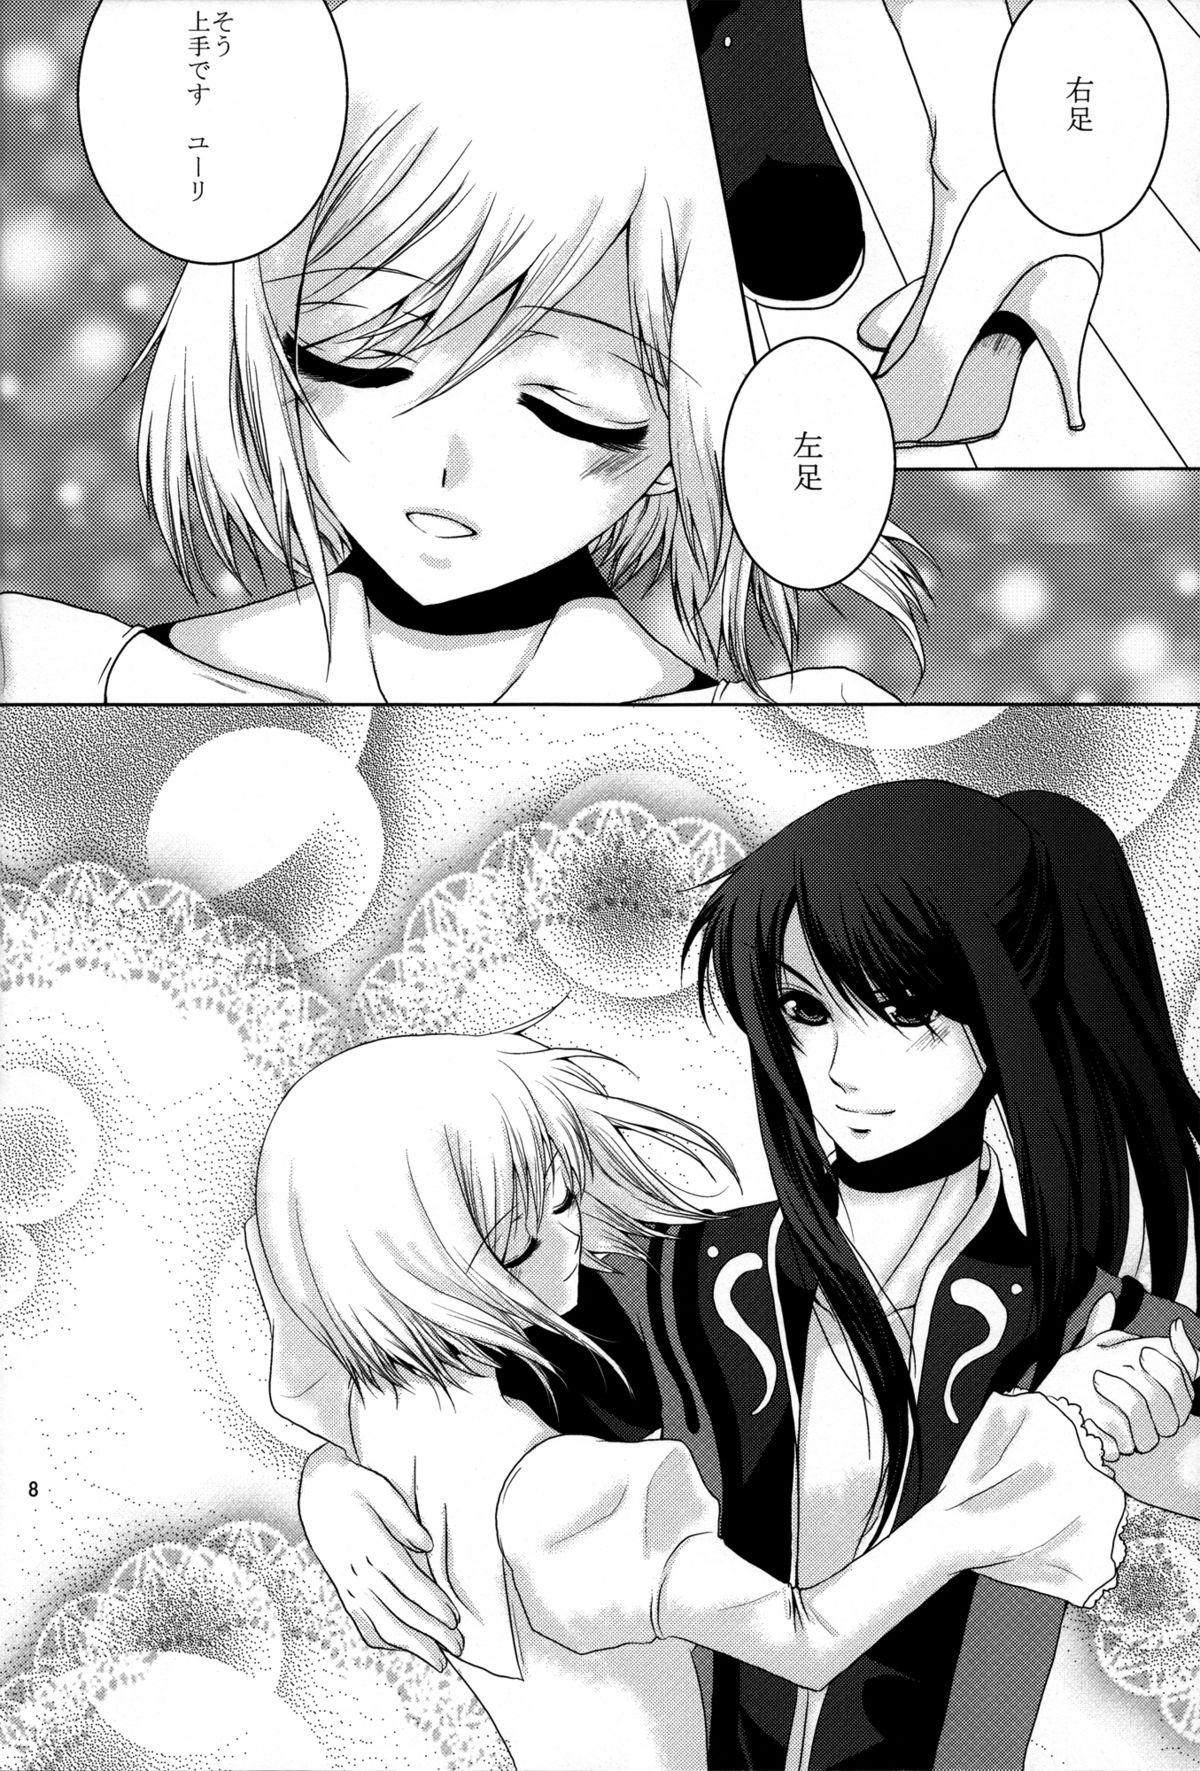 Butts Etoile - Tales of vesperia Slave - Page 8